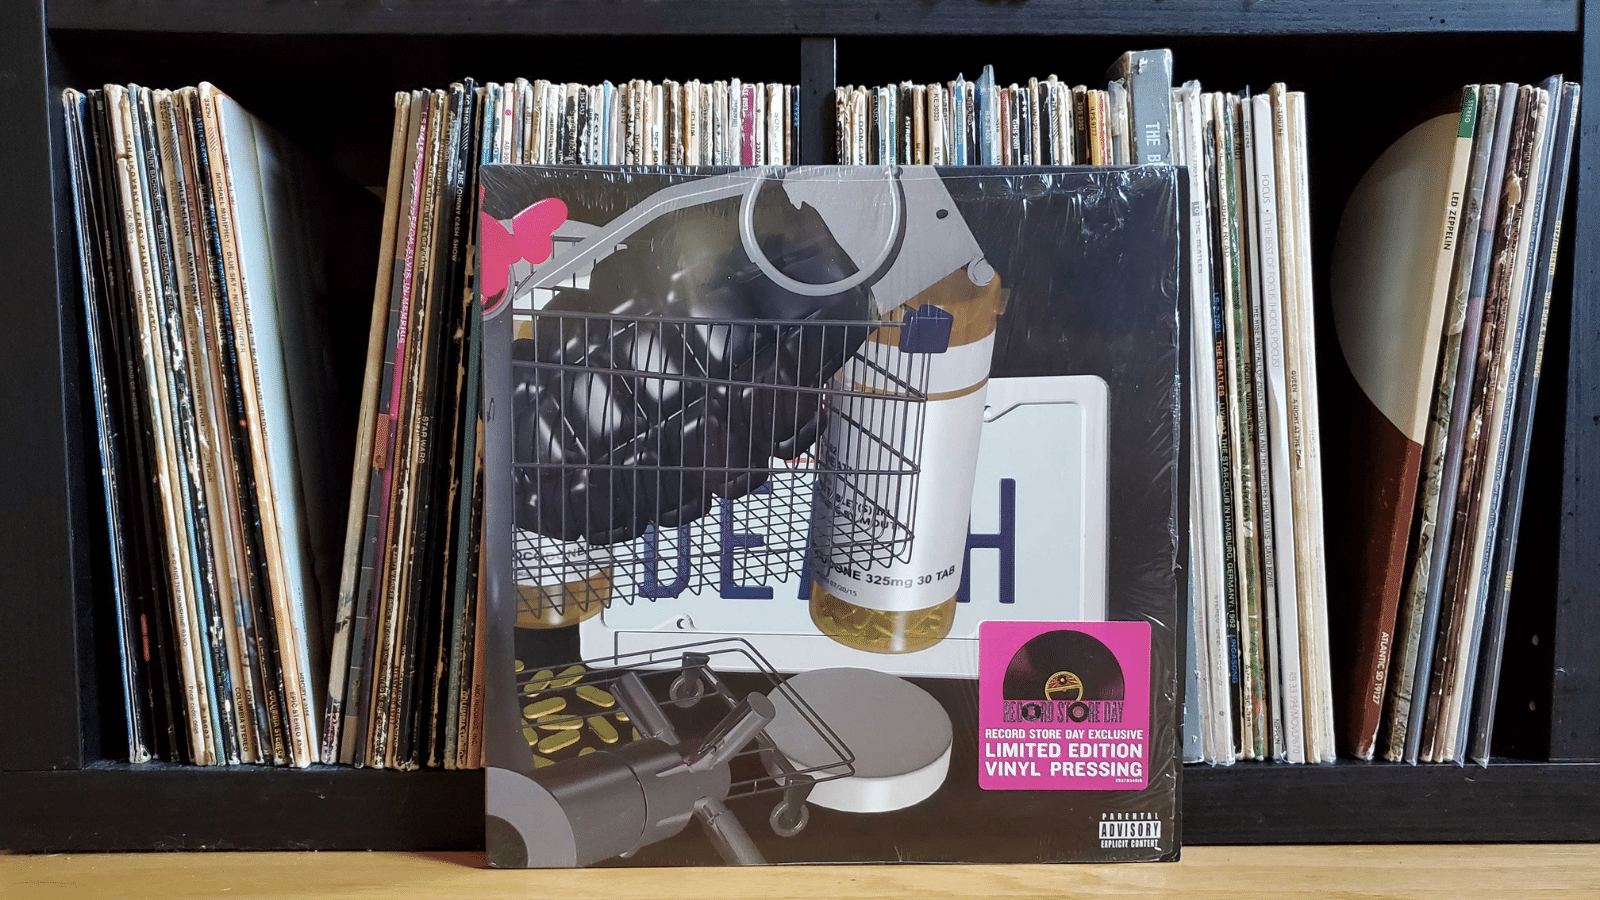 Death Grips Government Plates vinyl cover leaning against a shelf filled with other vinyl records